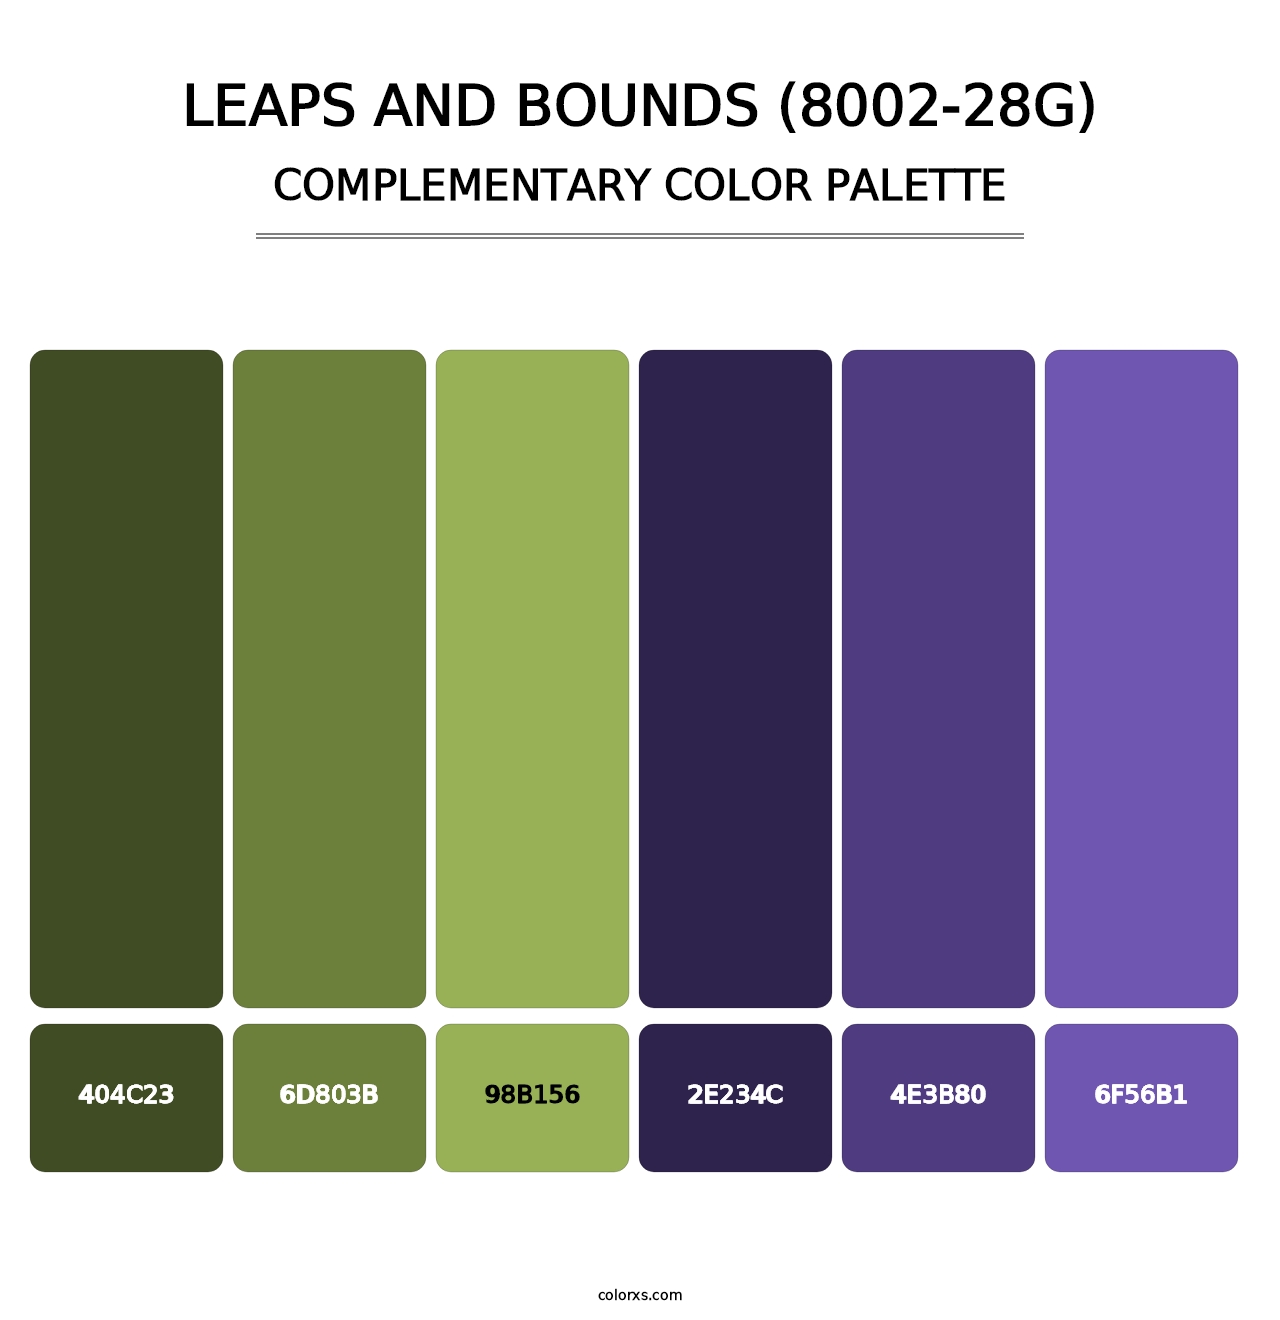 Leaps and Bounds (8002-28G) - Complementary Color Palette